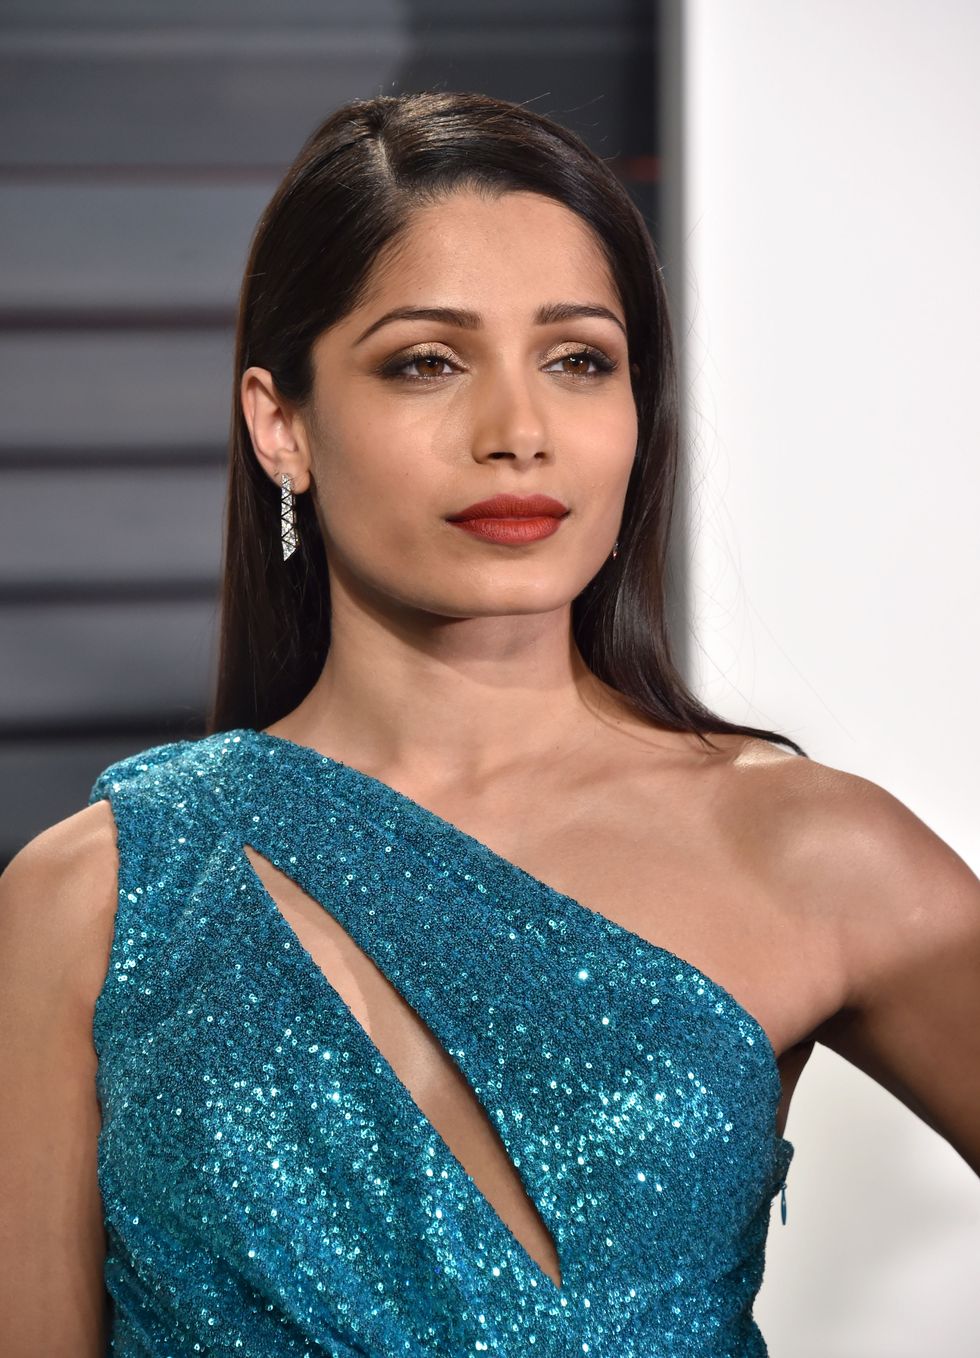 BEVERLY HILLS, CA - FEBRUARY 26:  Actress Freida Pinto attends the 2017 Vanity Fair Oscar Party hosted by Graydon Carter at Wallis Annenberg Center for the Performing Arts on February 26, 2017 in Beverly Hills, California.  (Photo by Alberto E. Rodriguez/WireImage)